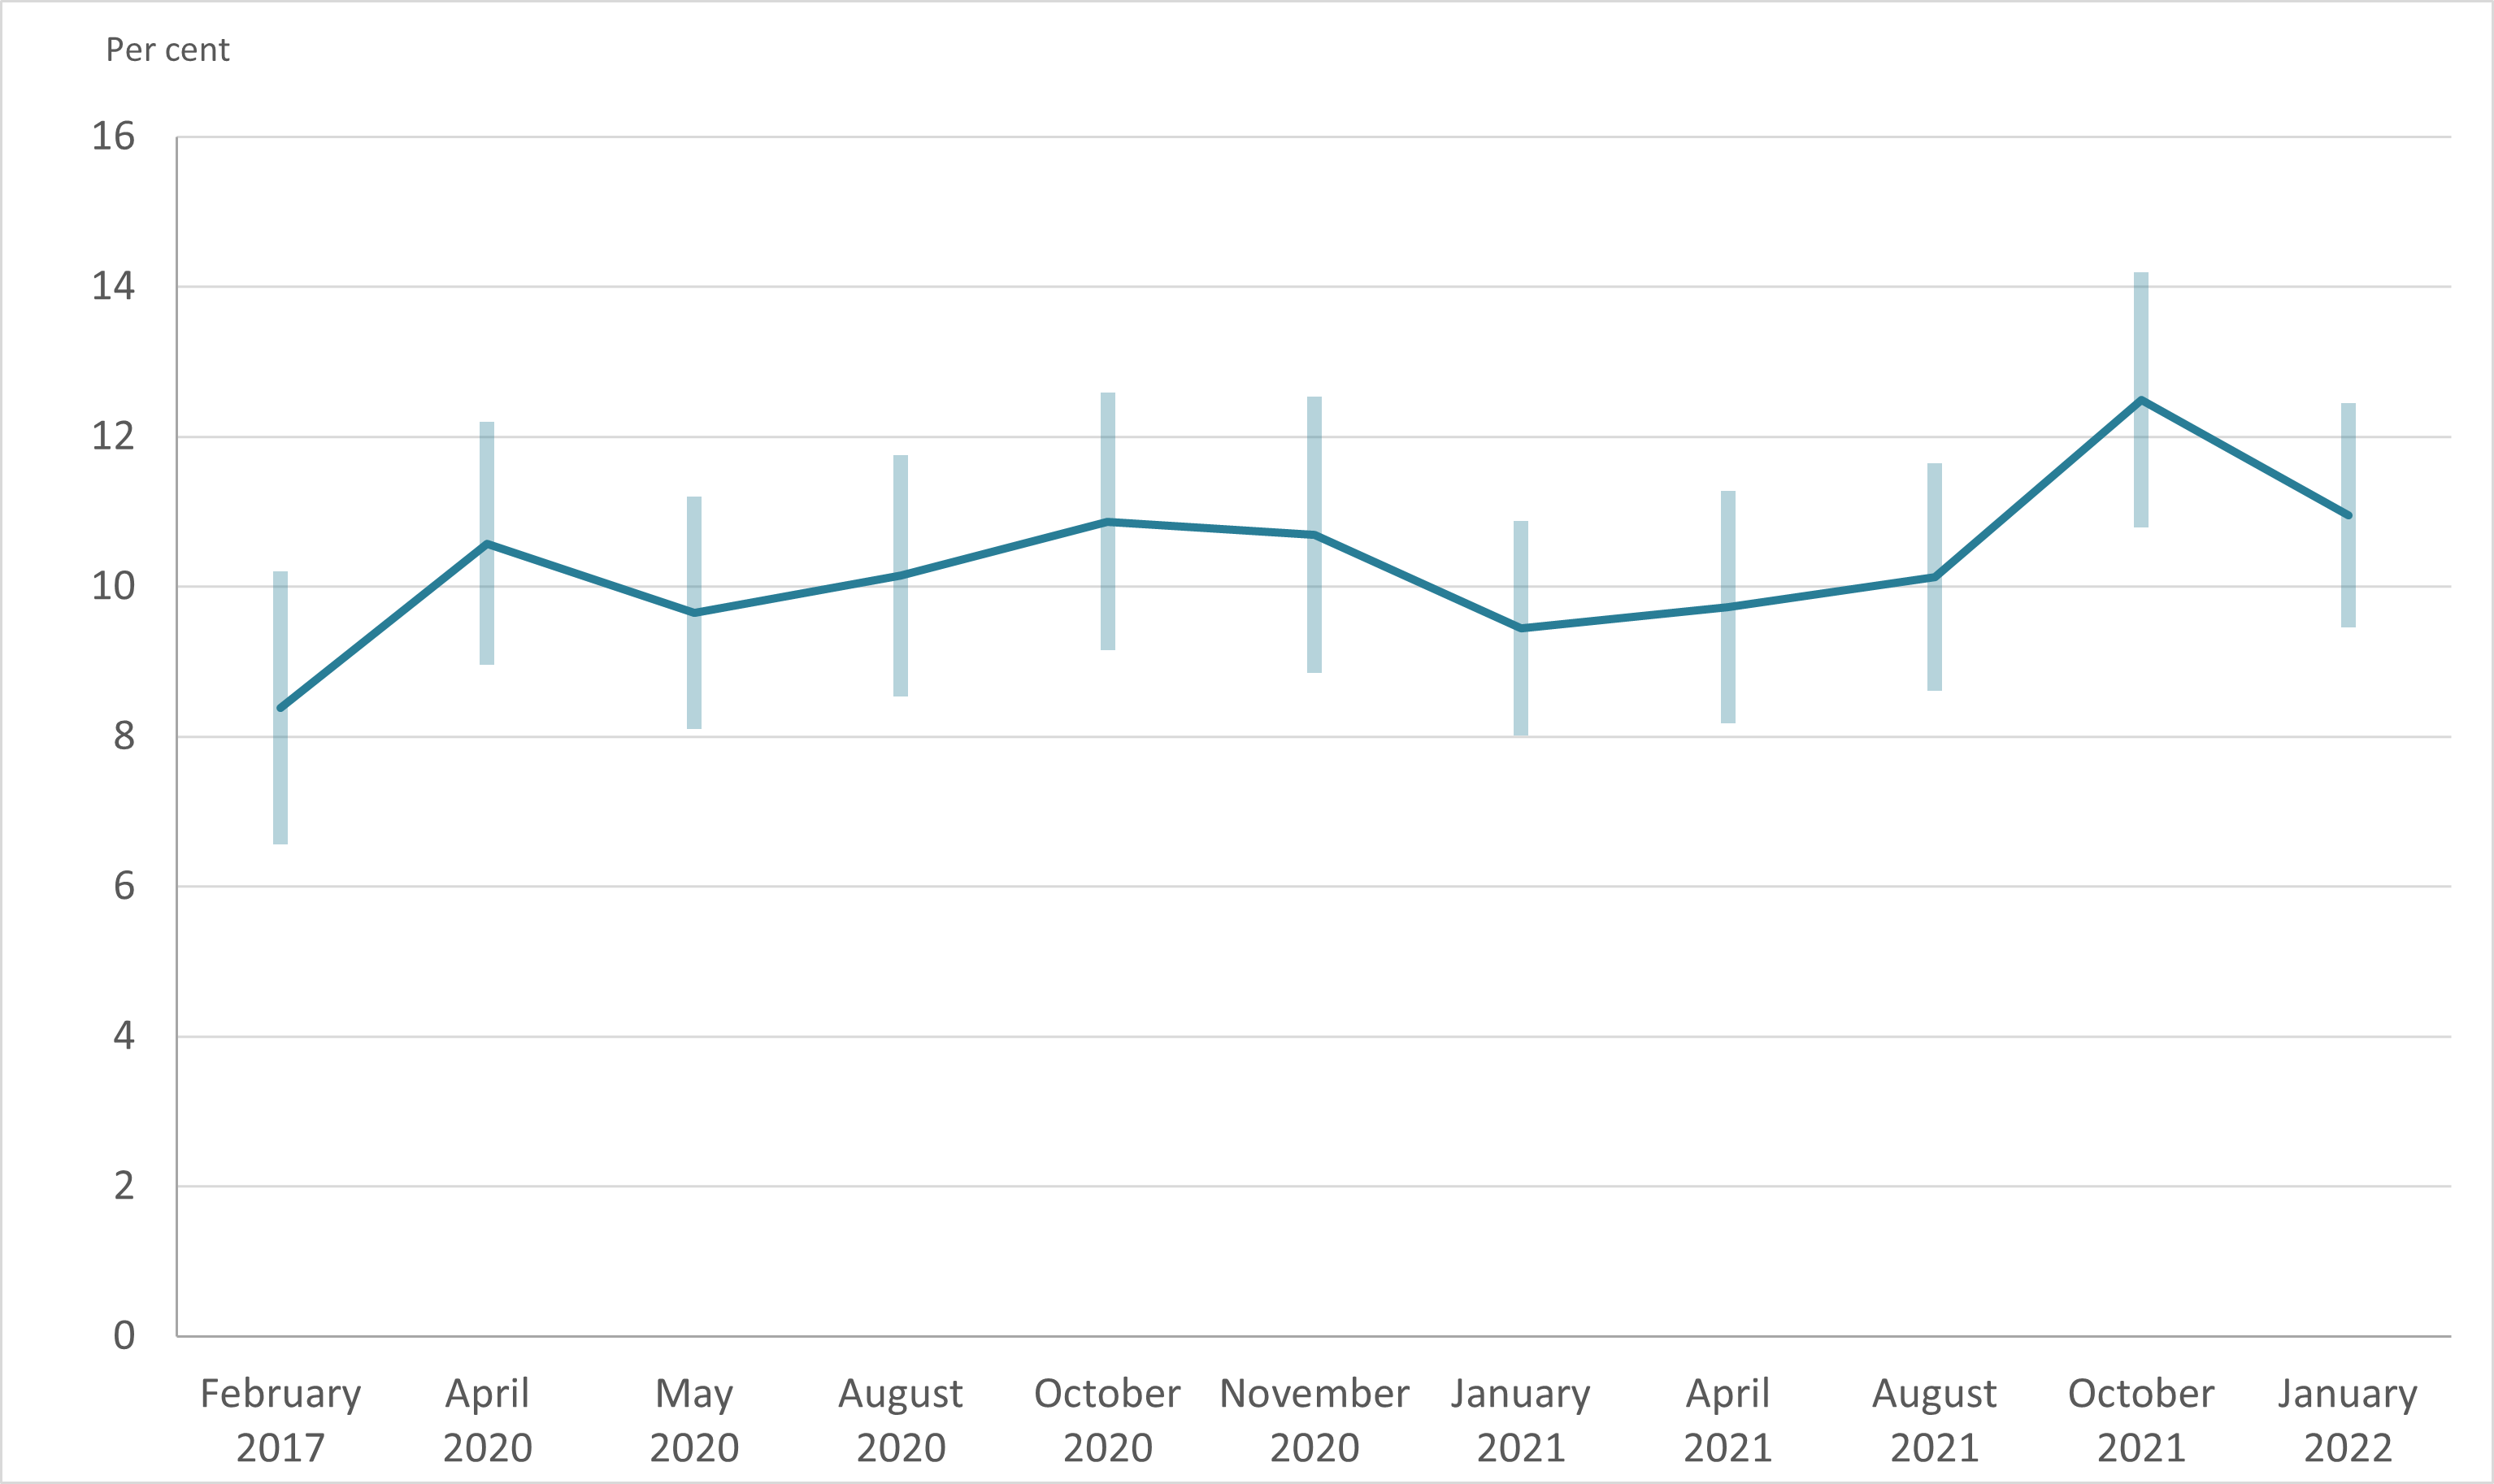 This figure shows that the proportion of Australians experiencing severe psychological distress throughout the COVID-19 pandemic was highest in October 2021 at 12.5%25 and lowest in January 2021 at 9.4%25, which was still higher than 8.4%25 in February 2017.